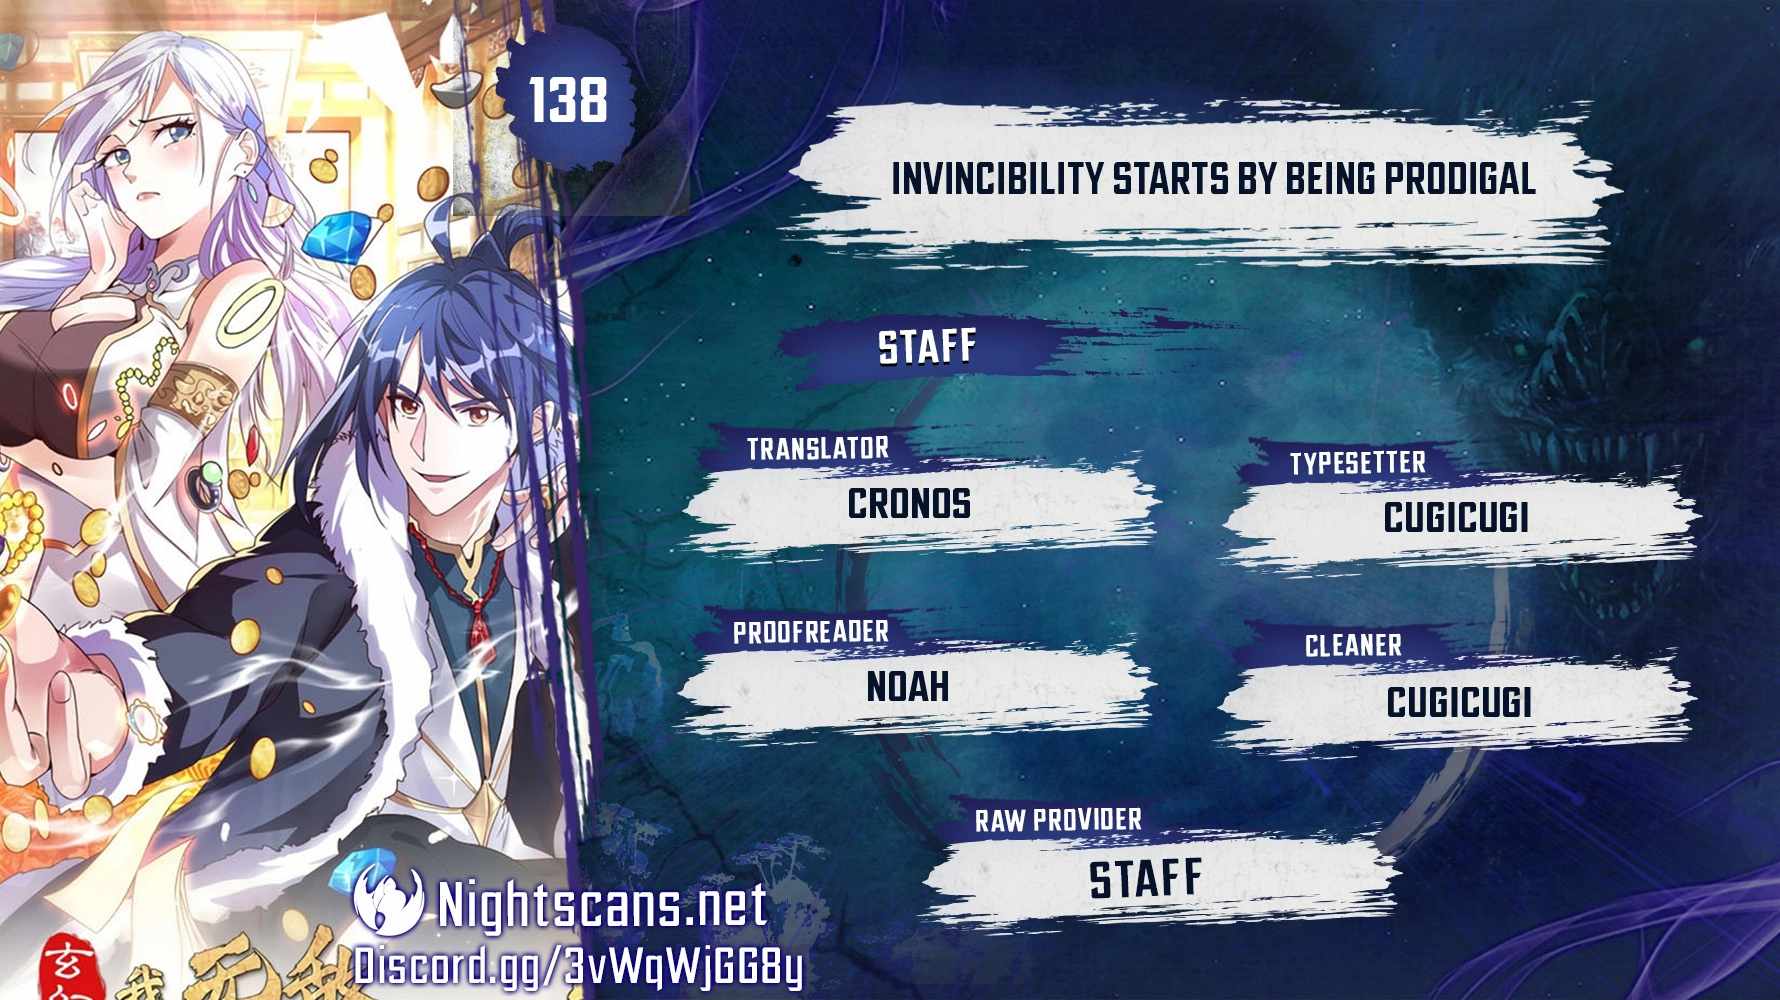 Fusion Fantasy: I, Invincibility Starting As The Prodigal! Chapter 138 #2